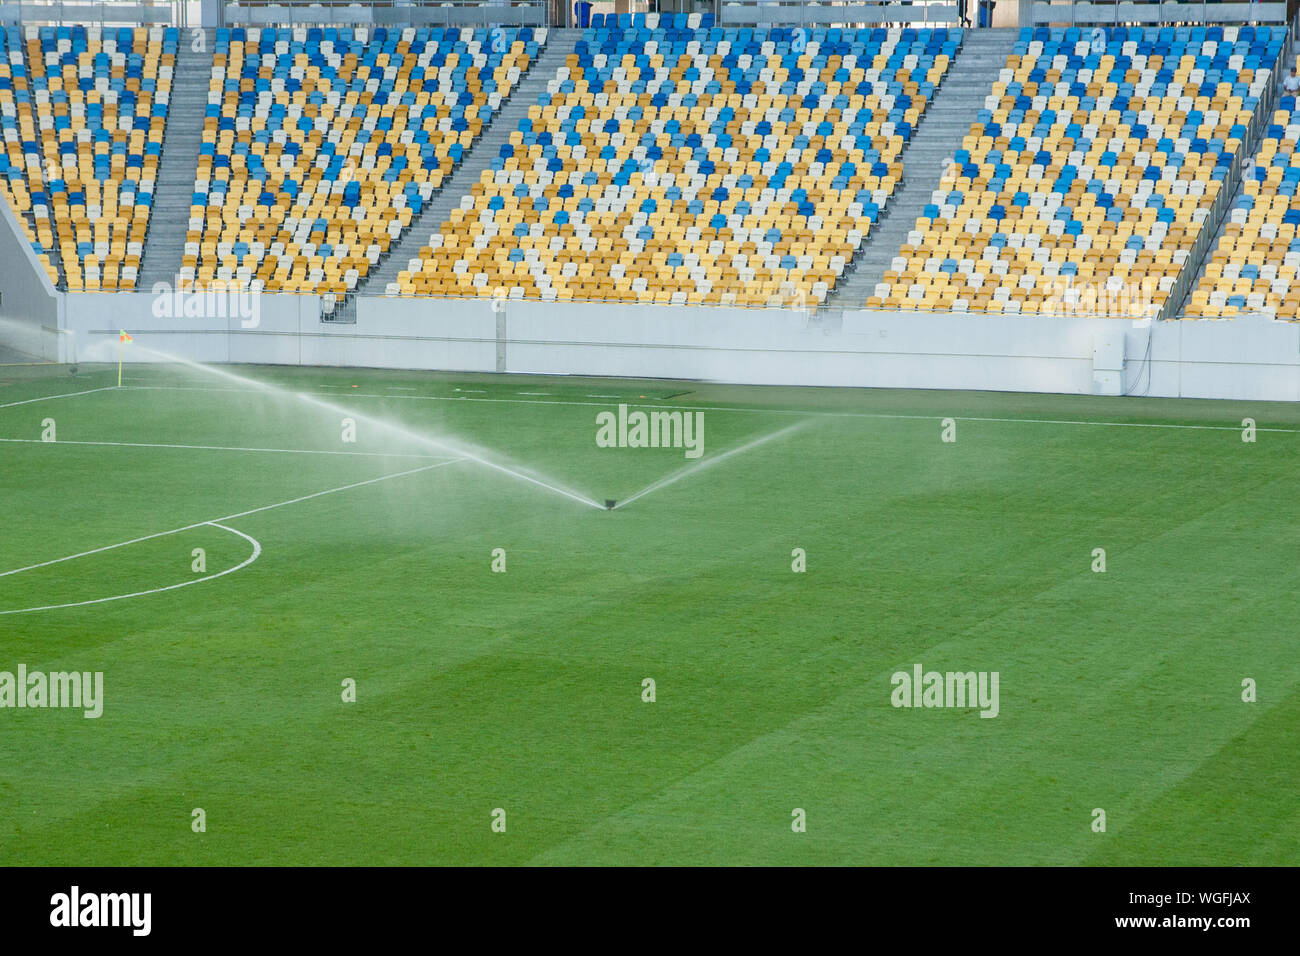 Automatic lawn grass watering system at the stadium. A football, soccer field in a small provincial town. Underground sprinklers spray jets water. Stock Photo